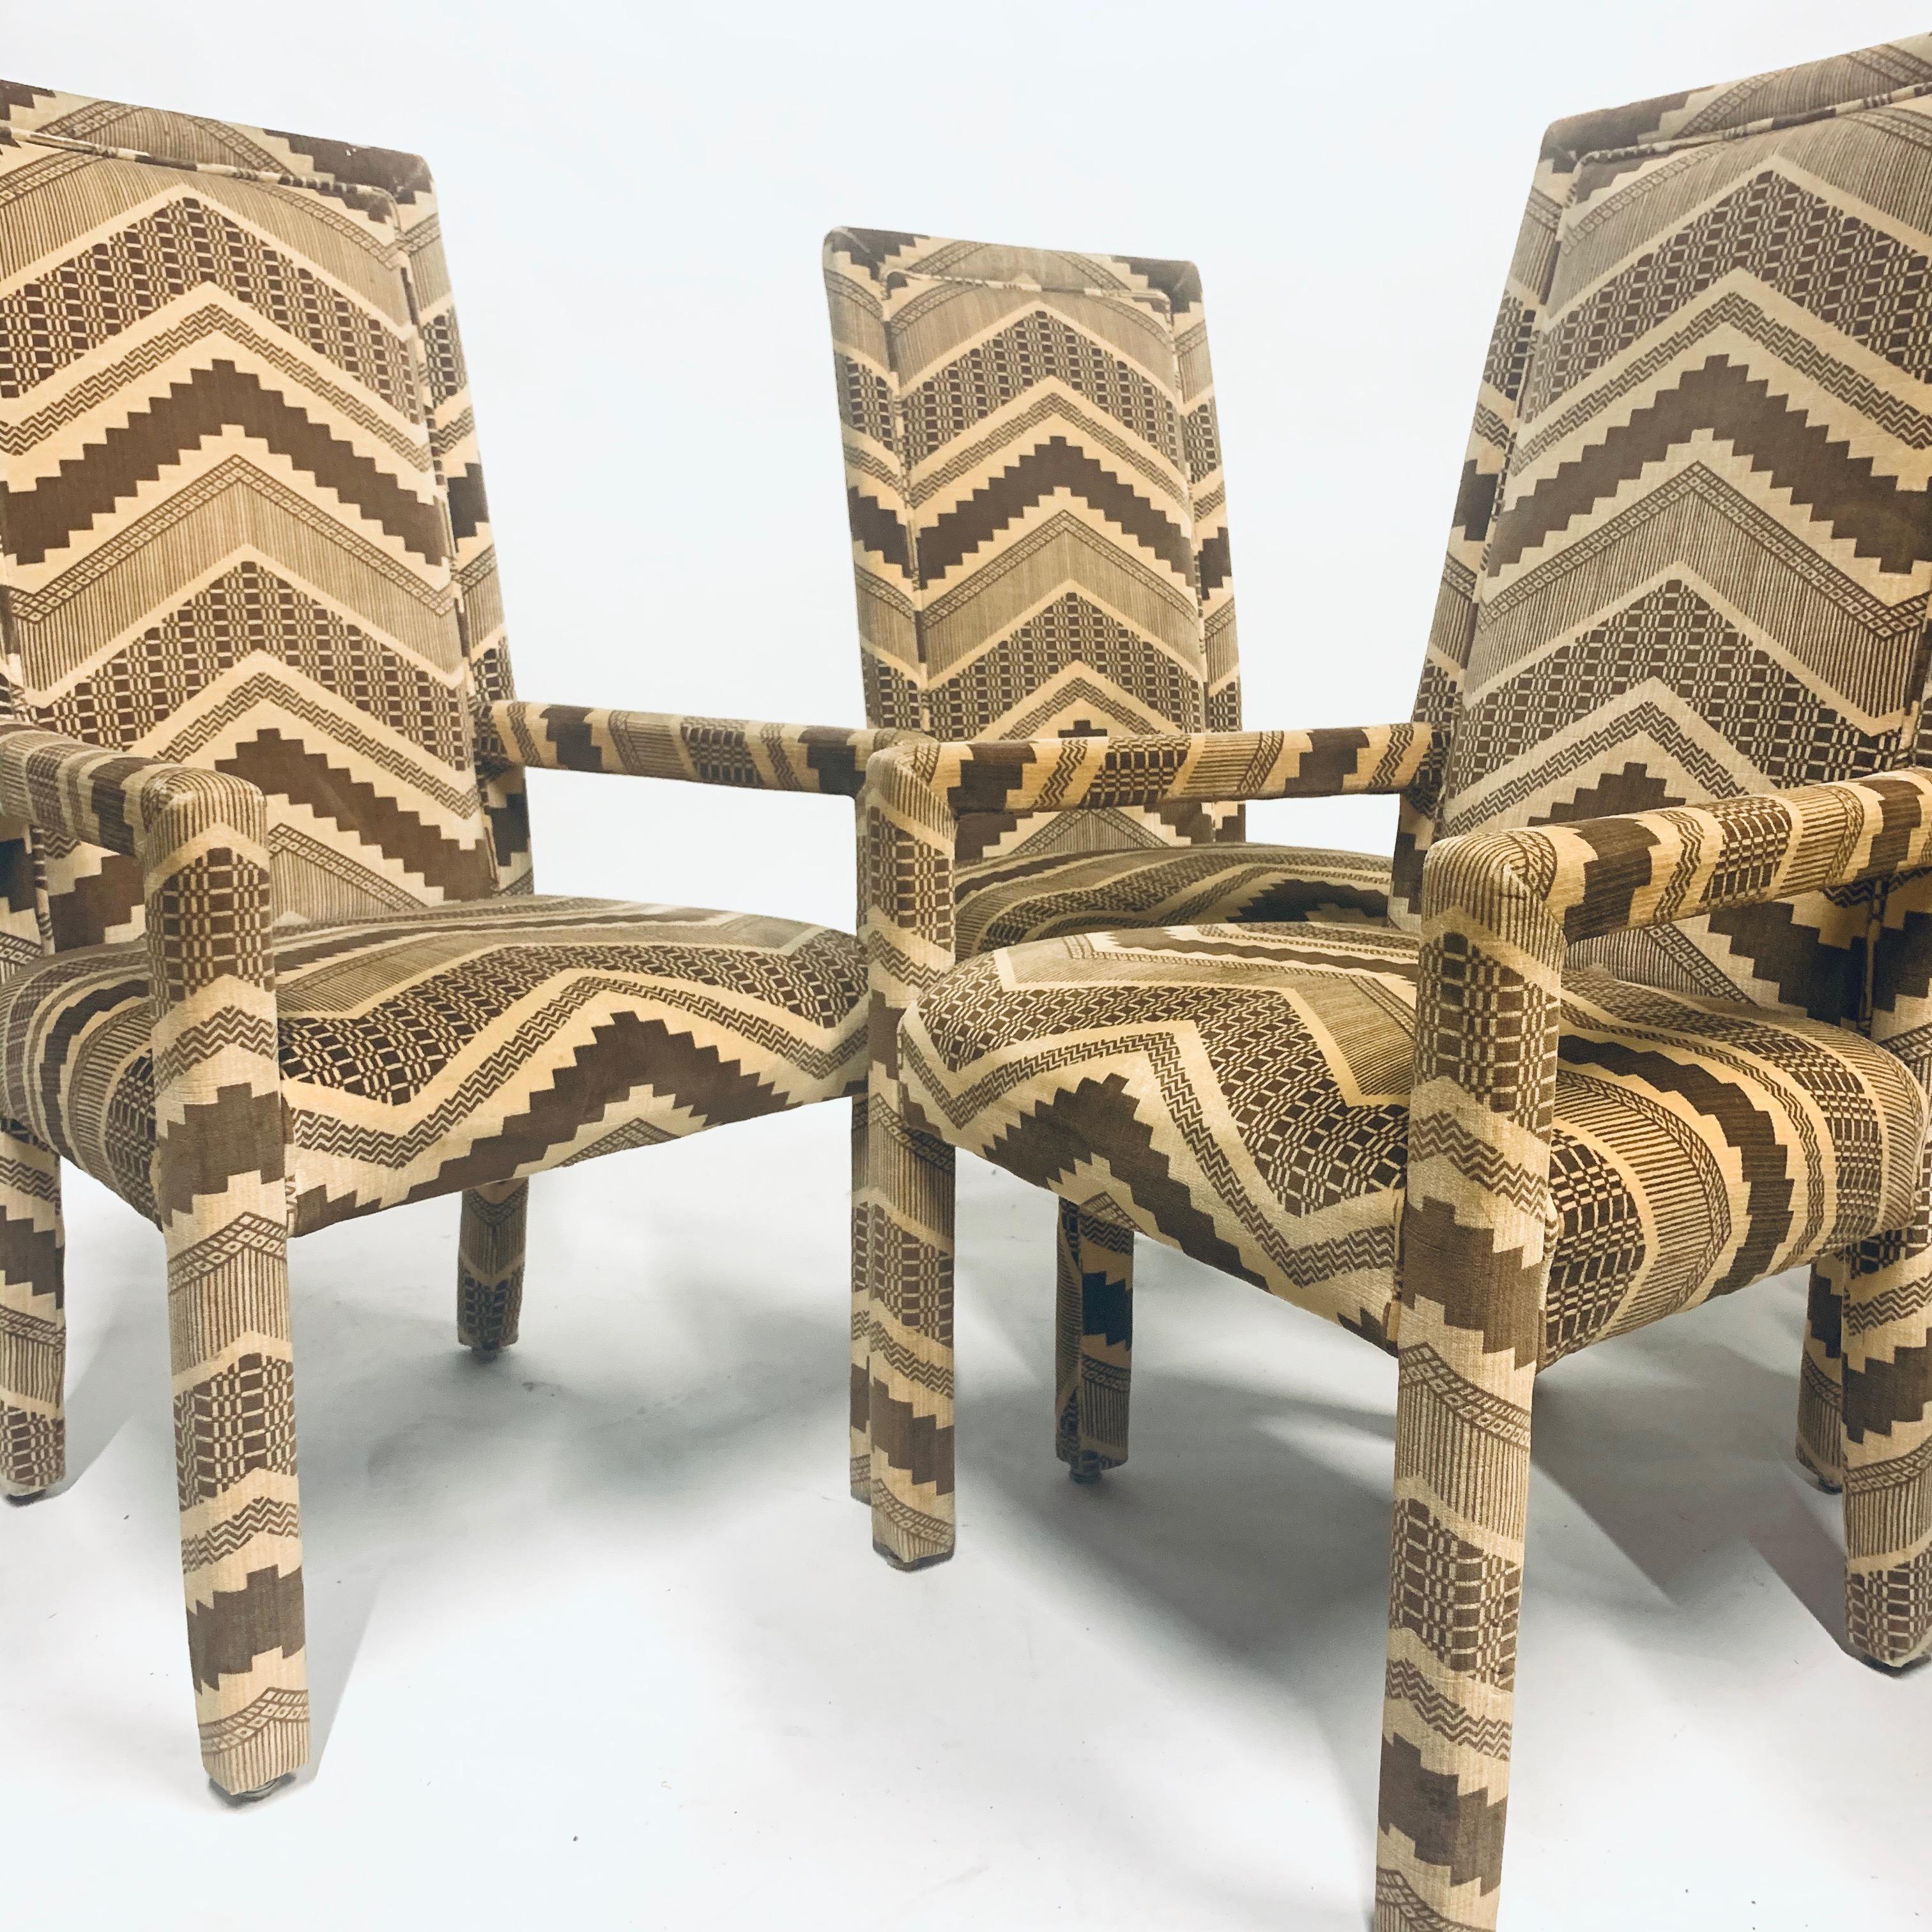 Stunning set of 6 dining chairs by Flair Furniture. These would be fabulous with a Paul Evans dining table or any 1970s decor. The colors are natural browns and beige tones, so would also work in a more natural organic decor.
4 side